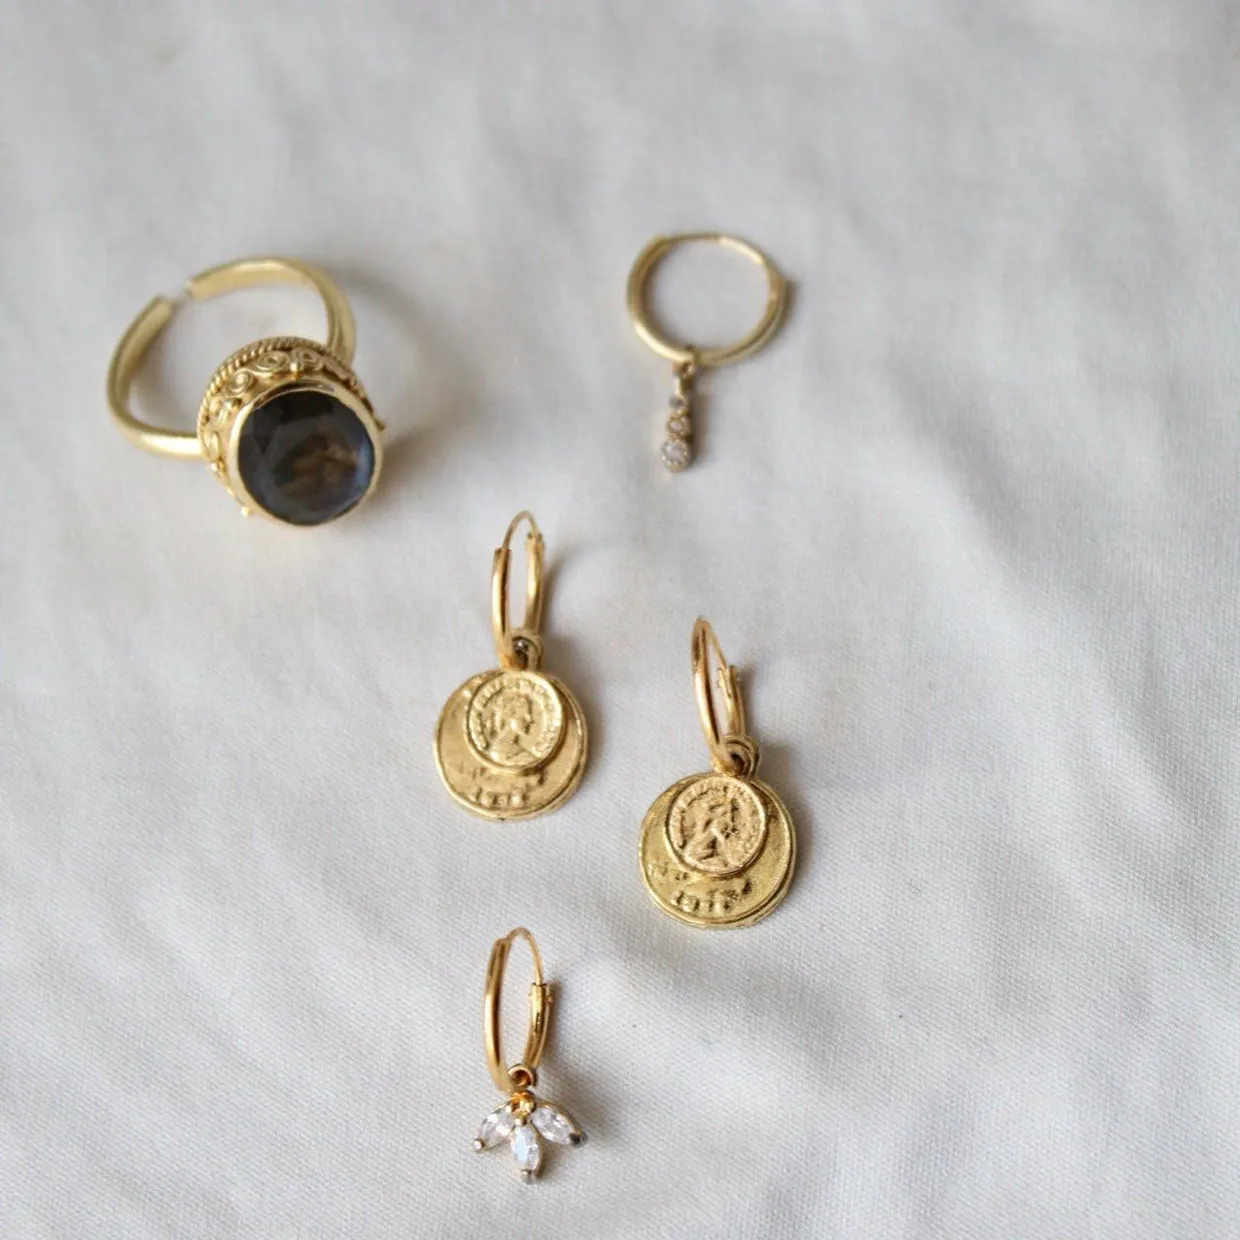 Coin small / big earrings